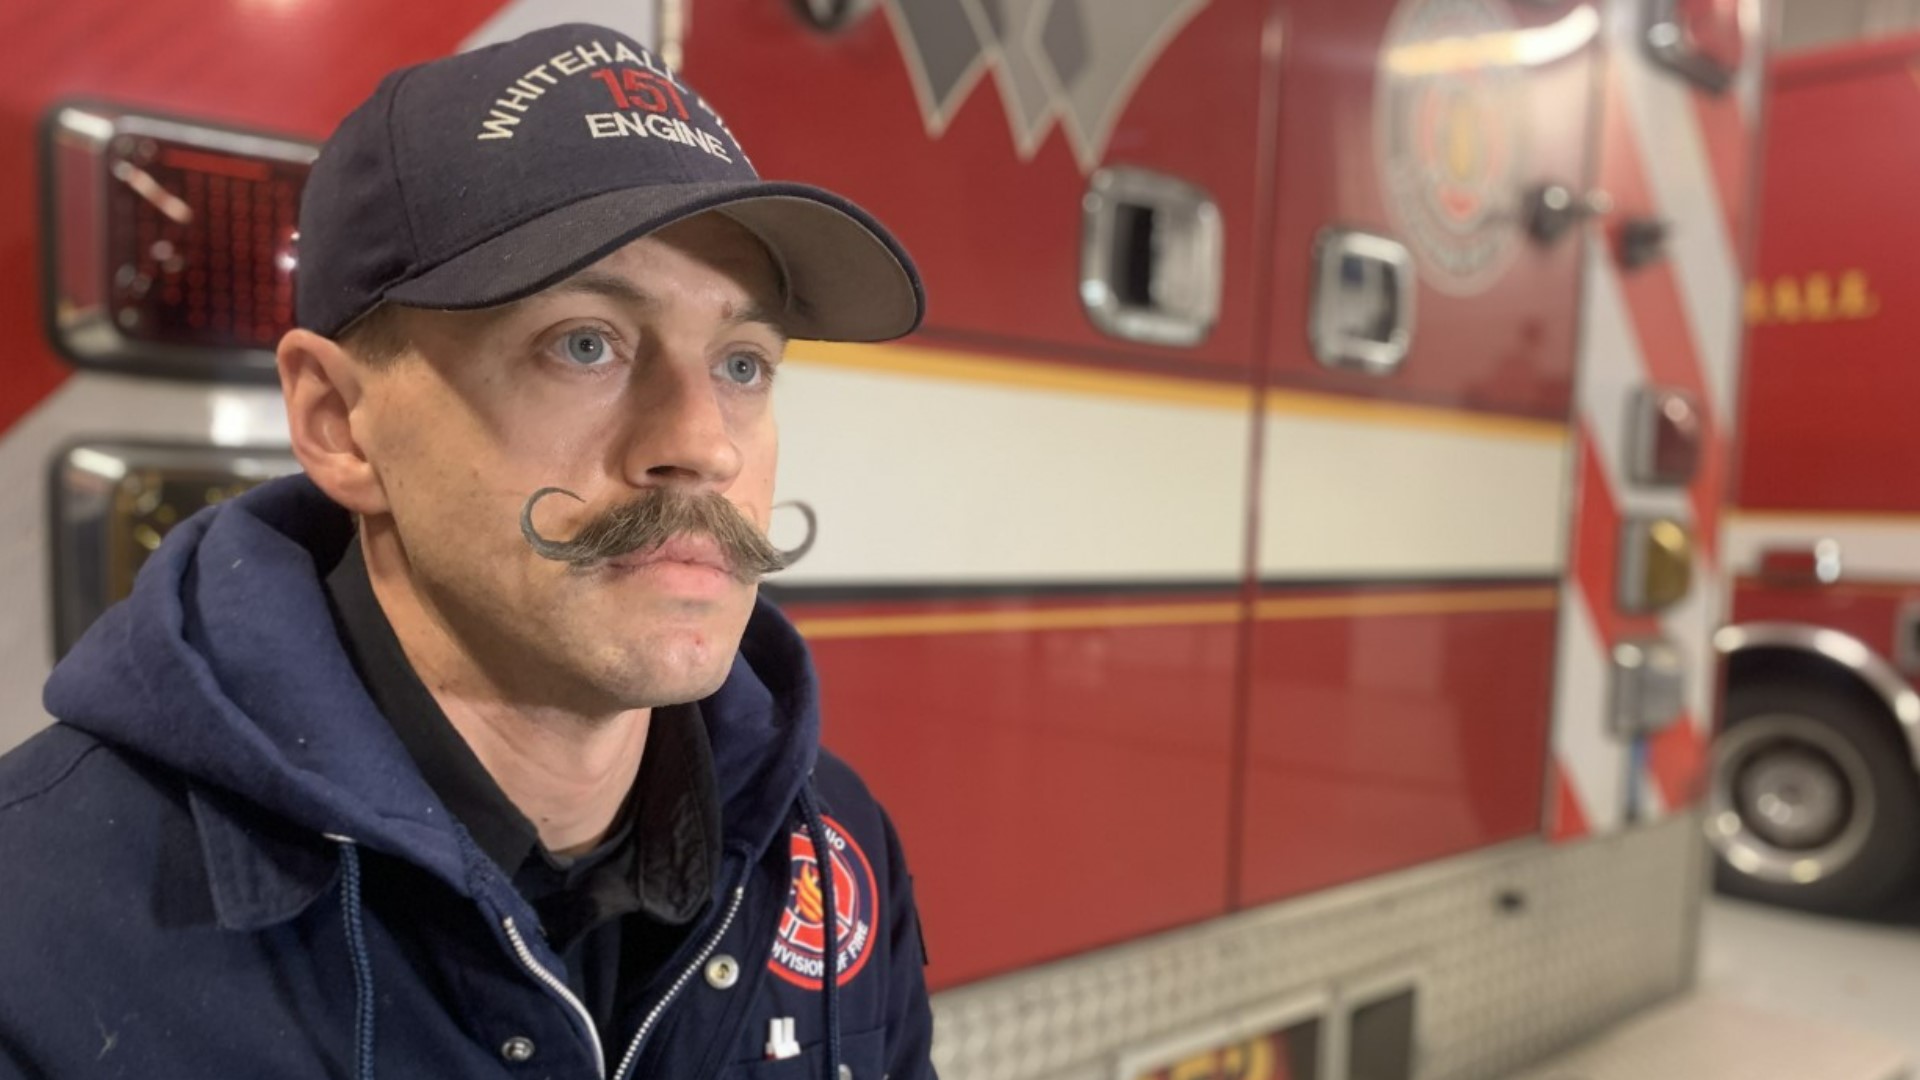 Shawn Stauffer has quite the 'stache and he's hoping to win the Salty Stache competition.